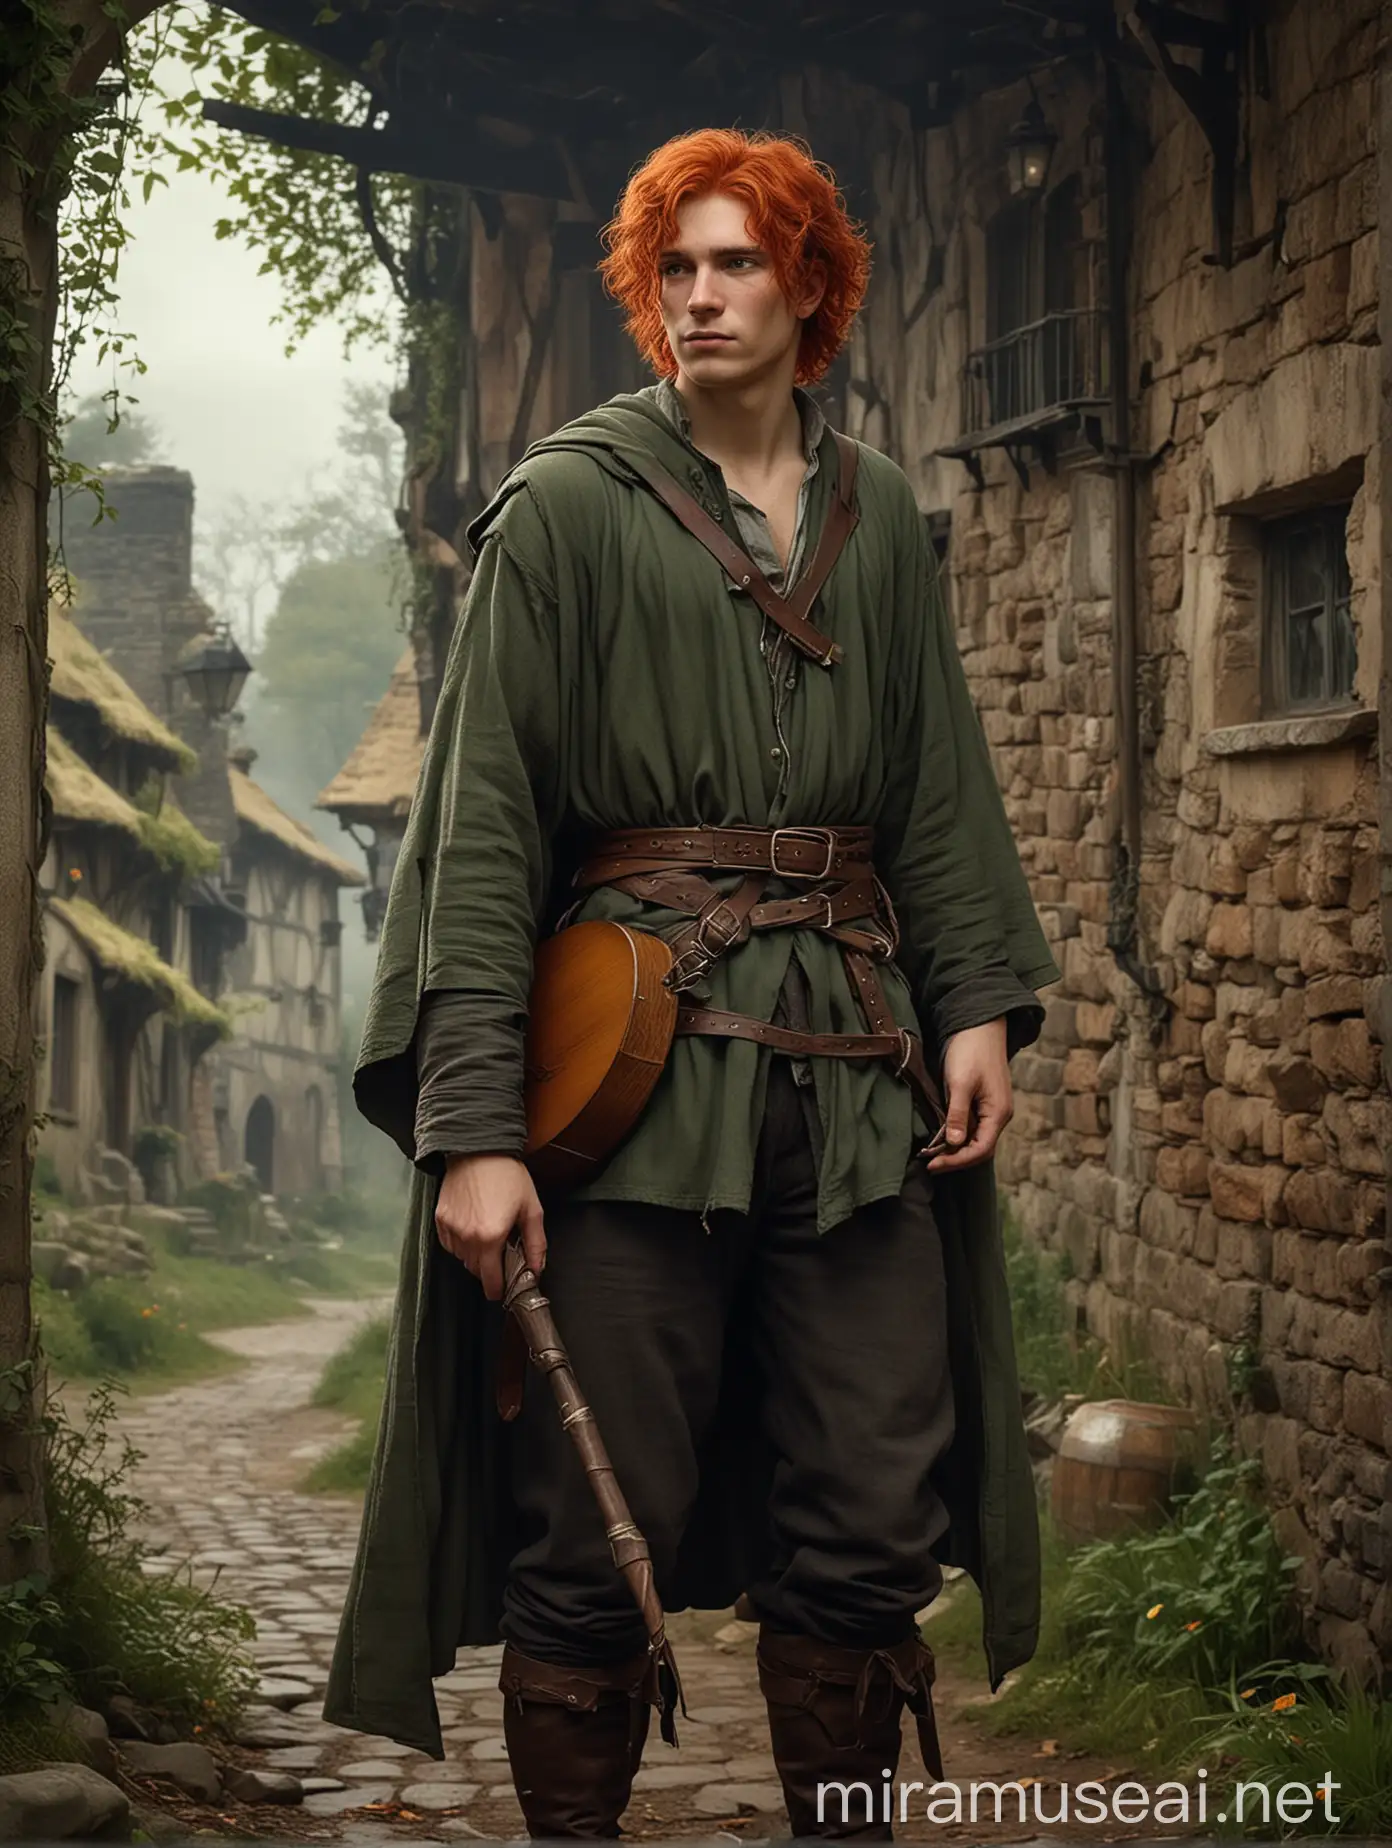 Create an image of Kvothe, the protagonist from Patrick Rothfuss's 'The Kingkiller Chronicle.' Kvothe is a young man in his late teens to early twenties. He has striking red hair that is thick and unruly, often described as a 'flame.' His eyes are a vivid green, sharp and intelligent. His face is expressive and shows both his youthful exuberance and the weight of his experiences.  Kvothe is tall and lean with a wiry build, reflecting both his agility and strength. He often wears practical, slightly worn clothes suitable for travel and adventure. His typical attire includes a simple shirt, a cloak, and sturdy boots. Occasionally, he might be seen with his lute, which he carries with him almost everywhere, signifying his deep connection to music.  He exudes a mix of confidence and mystery, with a hint of melancholy. His posture is upright, and his expression can shift from intense focus to a softer, more contemplative look. The background should hint at a rustic inn or an academic setting like the University, with warm, muted colors that complement his vibrant hair.